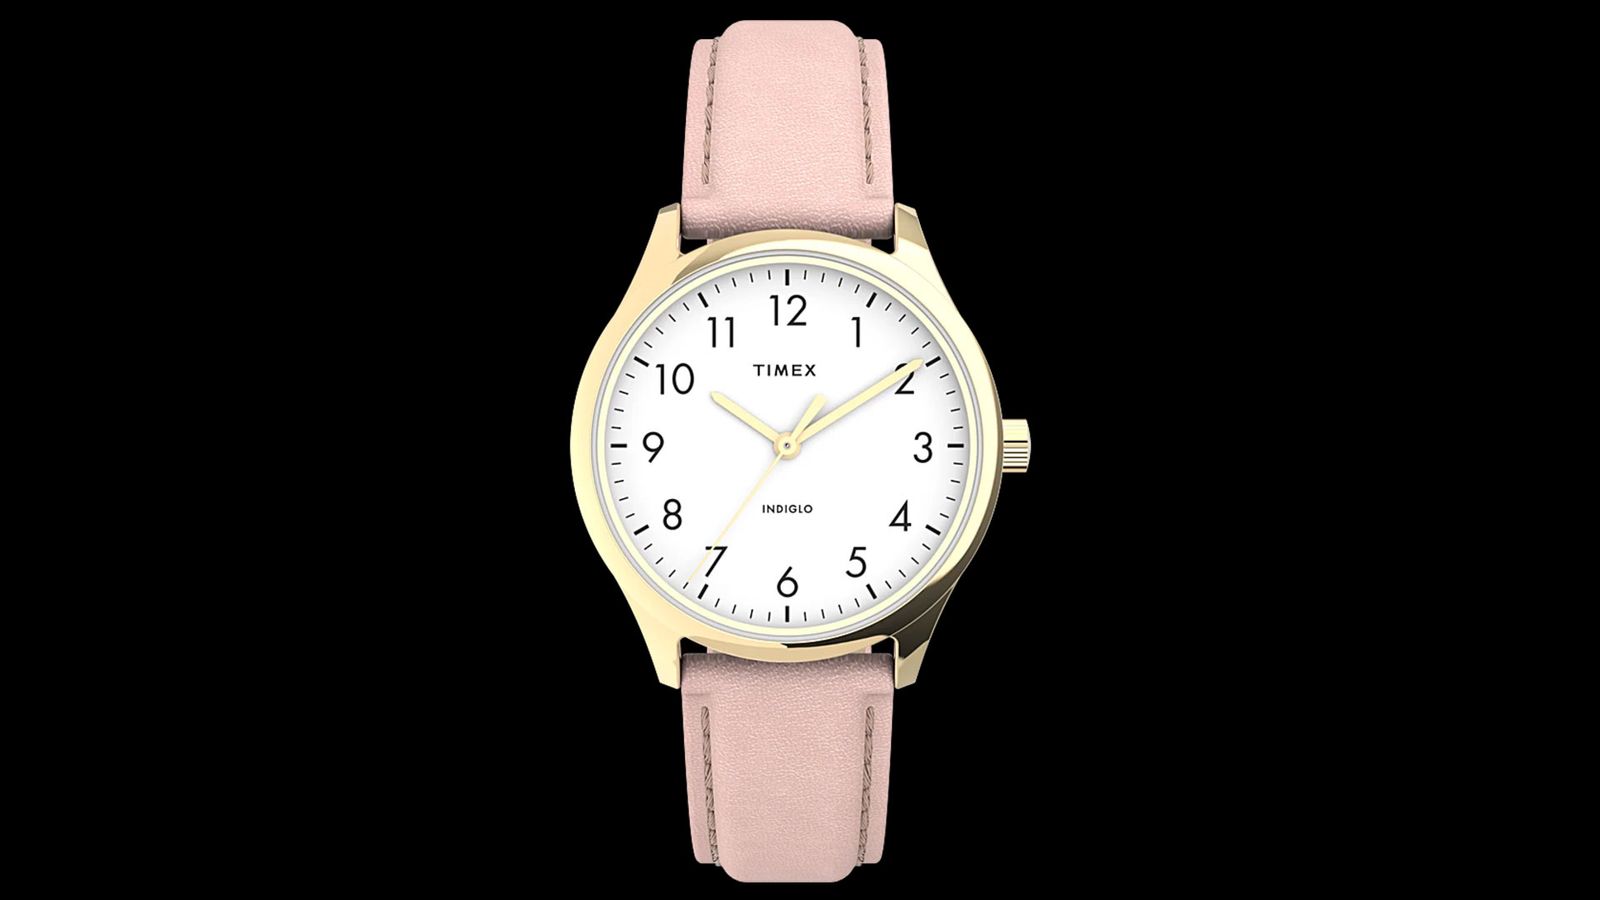 Timex Easy Reader product image of a light pink band and golden watch case.